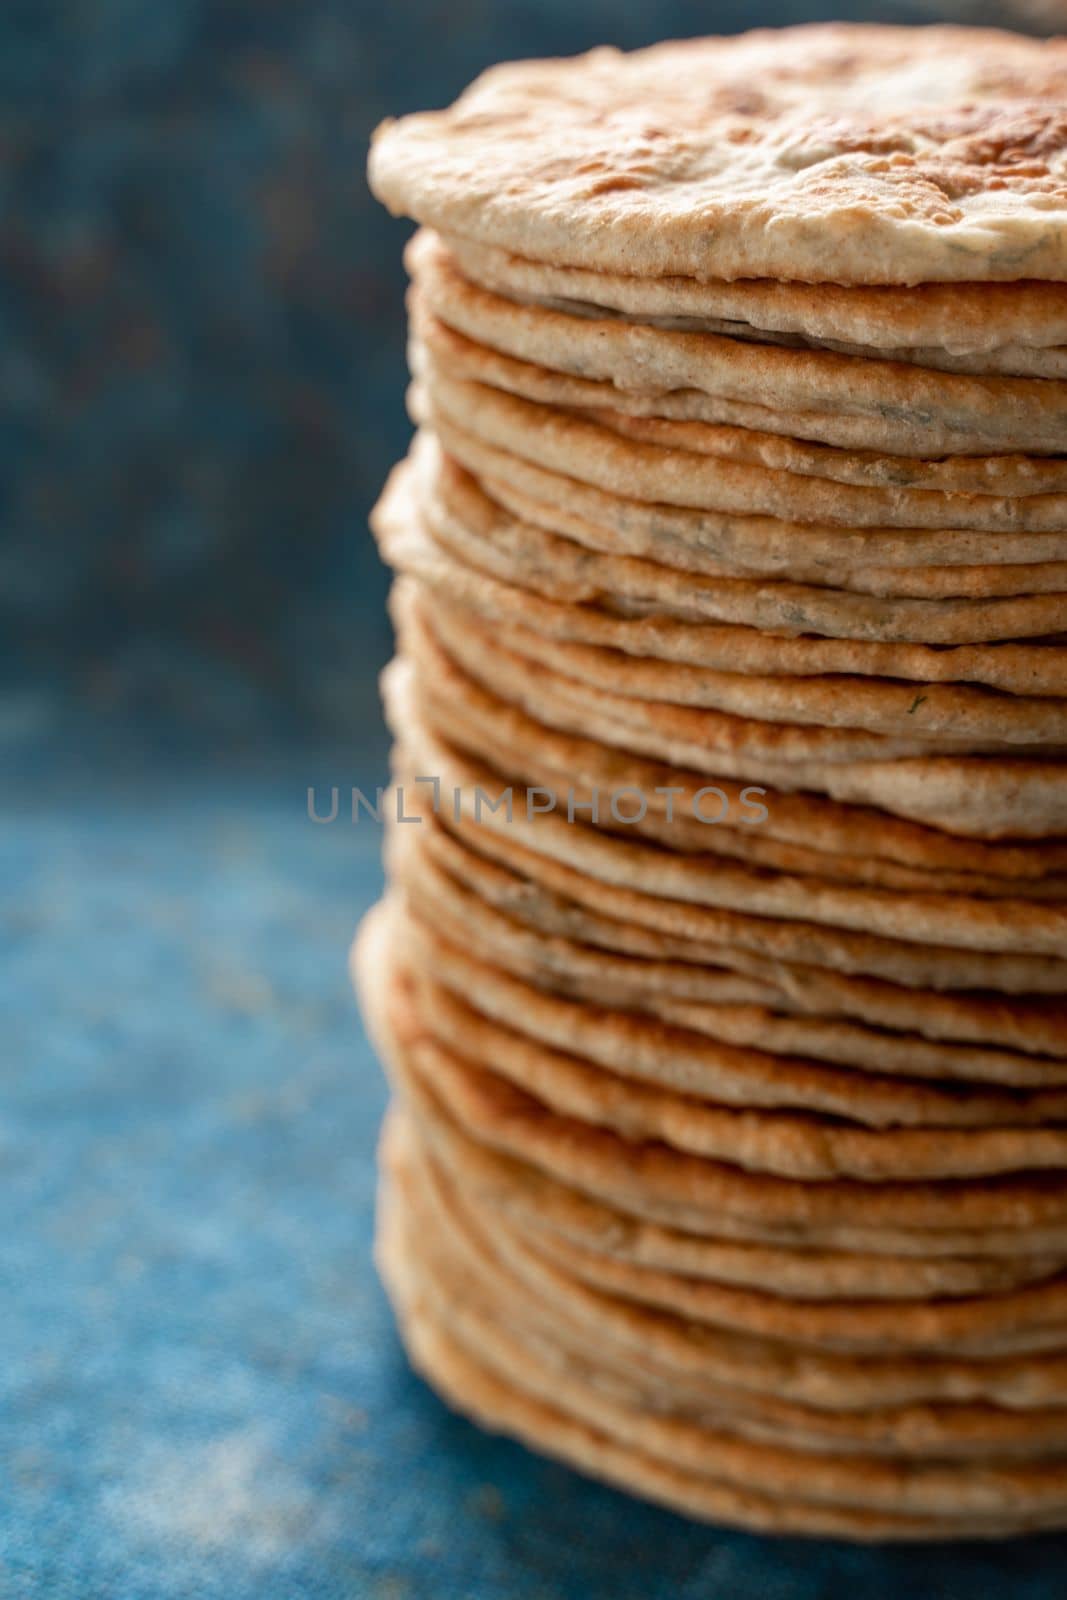 Flatbread lavash, chapati, naan, heap of tortilla on a blue background Homemade flatbread stacked. by Matiunina